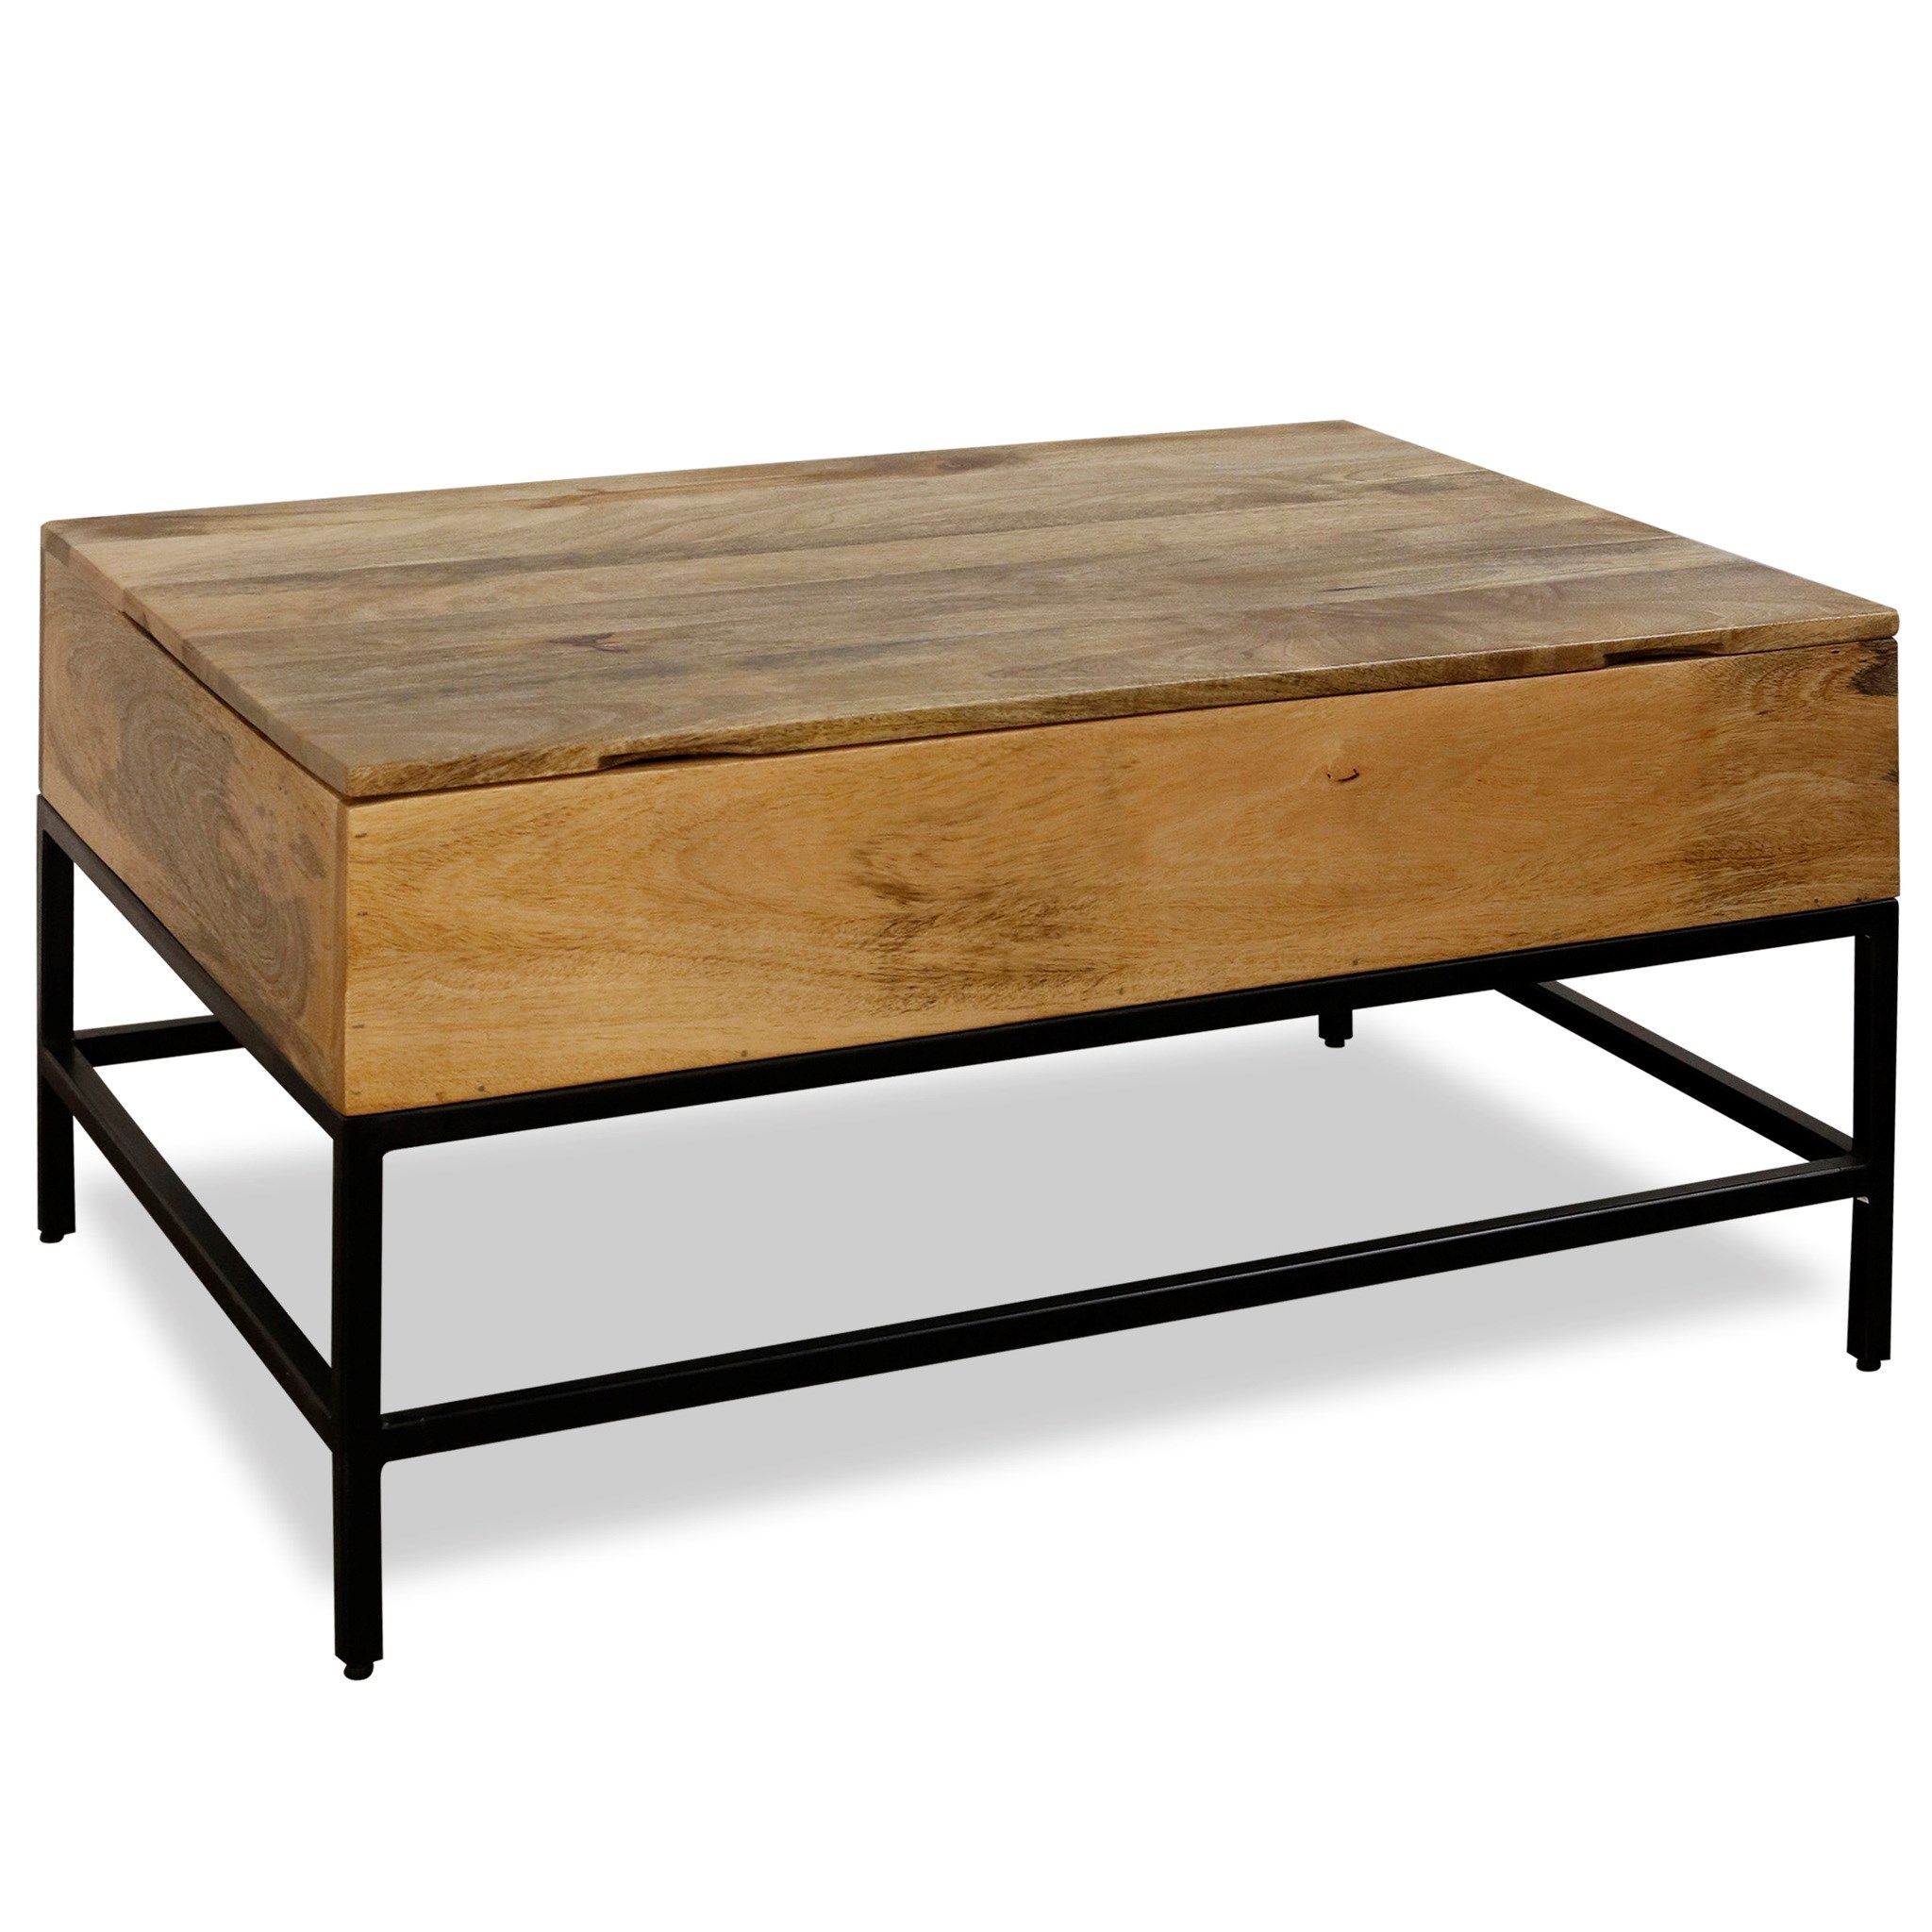 Solid Mango Wood Split Lift Top Storage Coffee Table In A Light Natural  Stainstylecraft – Broadway Furniture With Regard To Natural Stained Wood Coffee Tables (View 7 of 20)